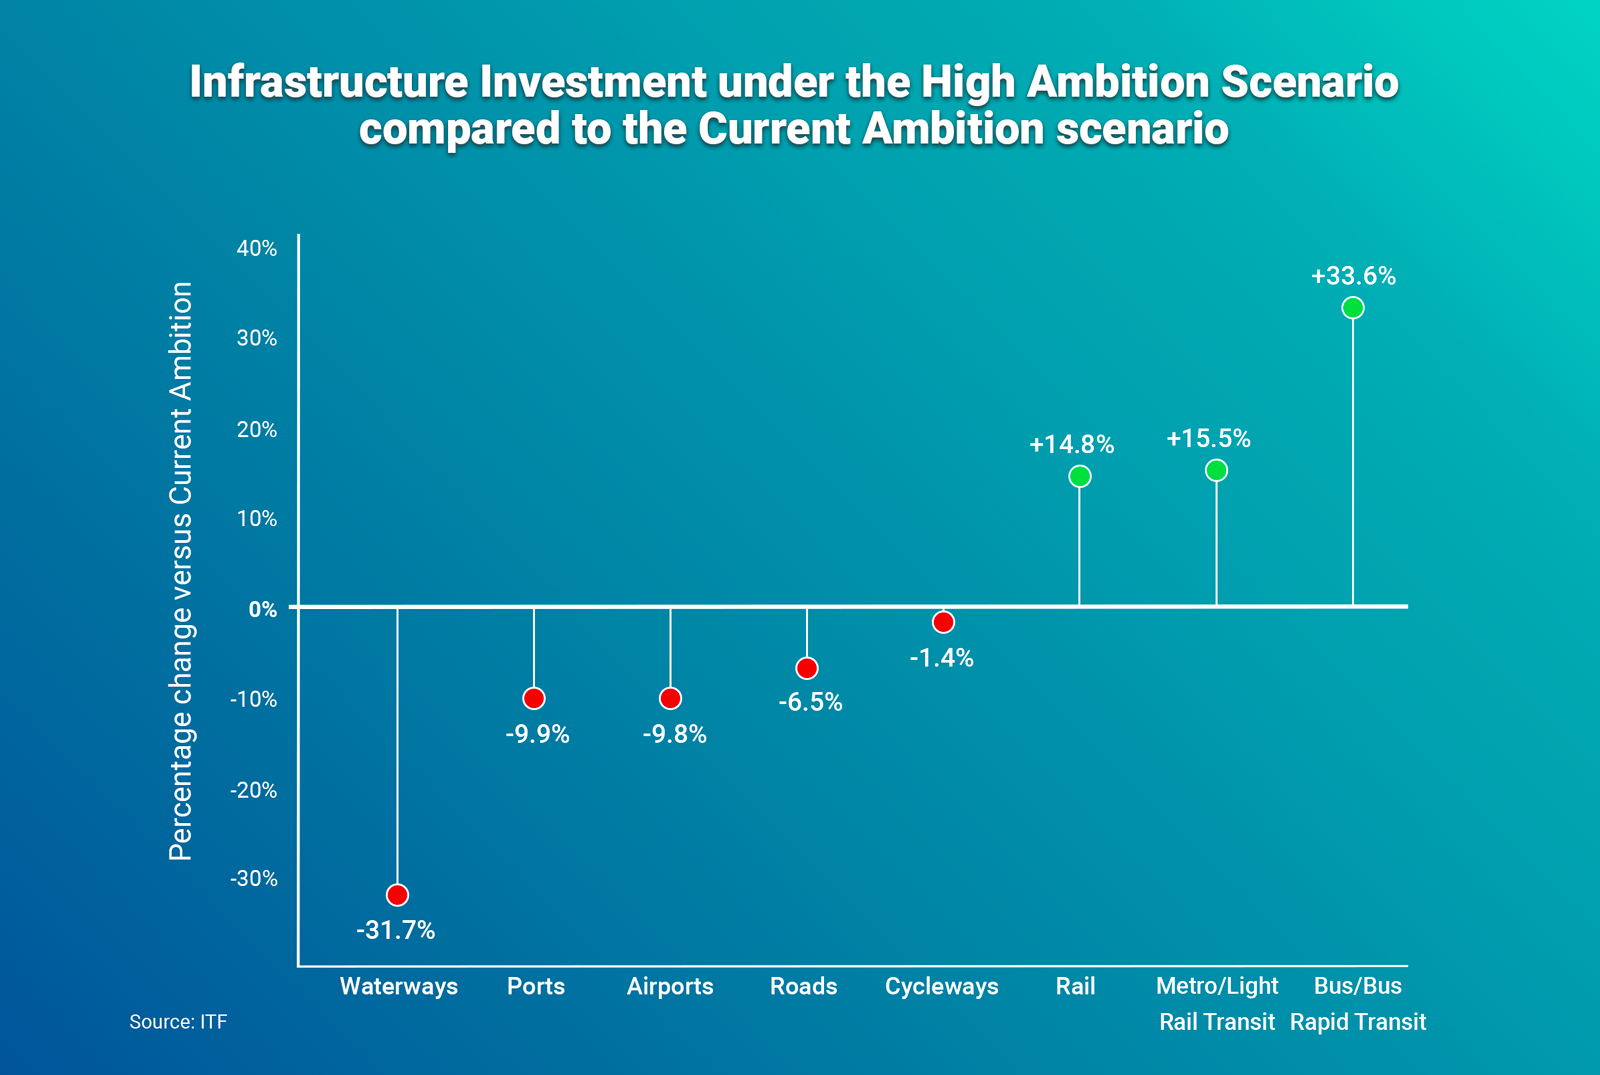 The graph shows, based on the High Ambition path, that decarbonizing transport requires much more investment in rail, metro/light rail transit and bus/bus rapid transit infrastructures than the current path.